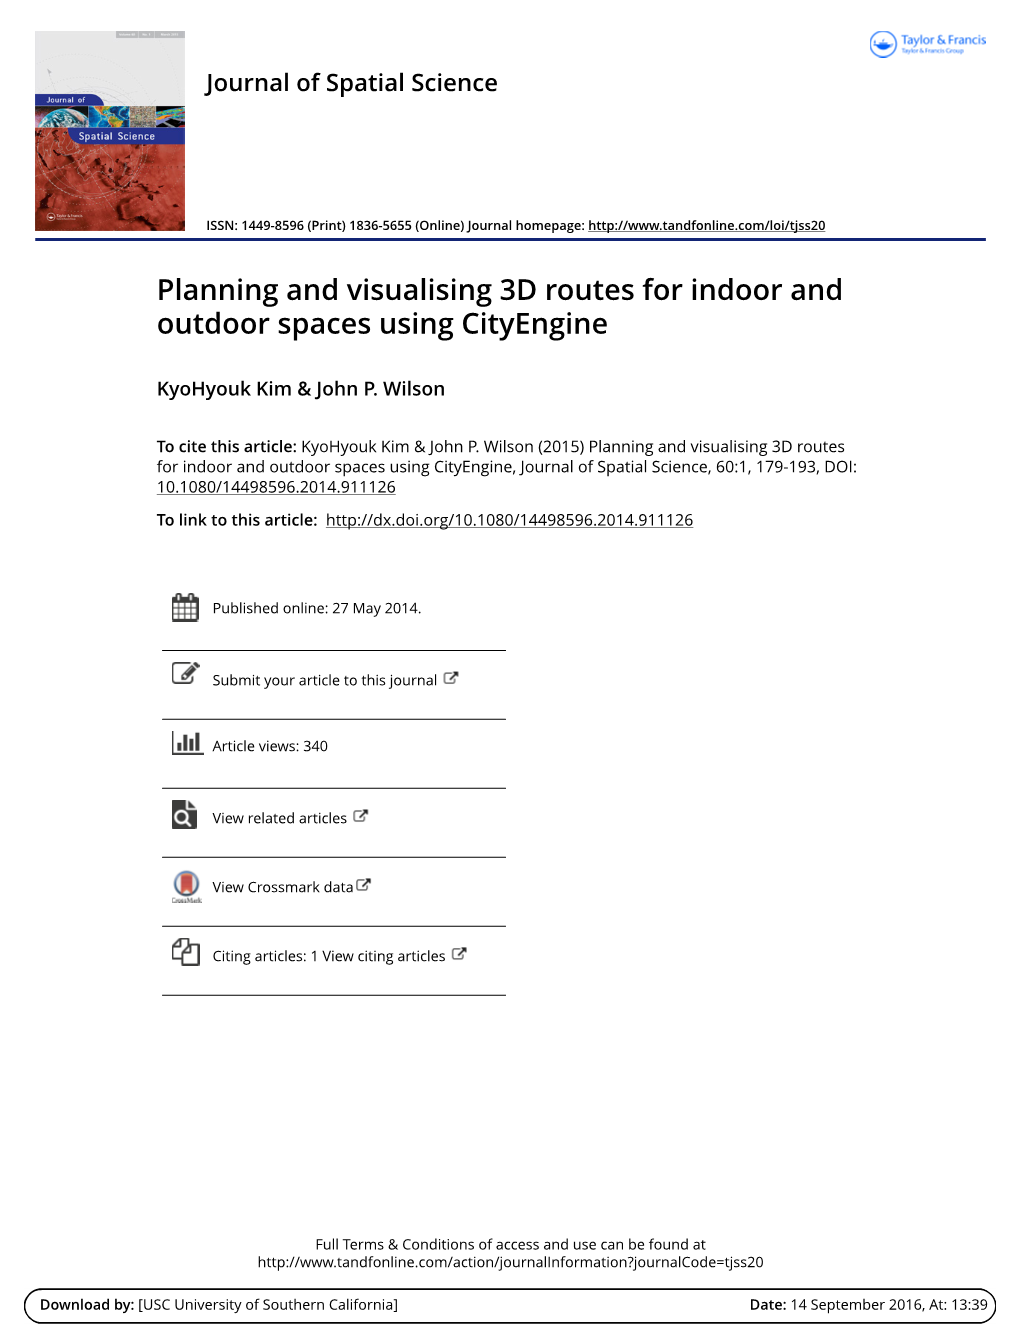 Planning and Visualising 3D Routes for Indoor and Outdoor Spaces Using Cityengine